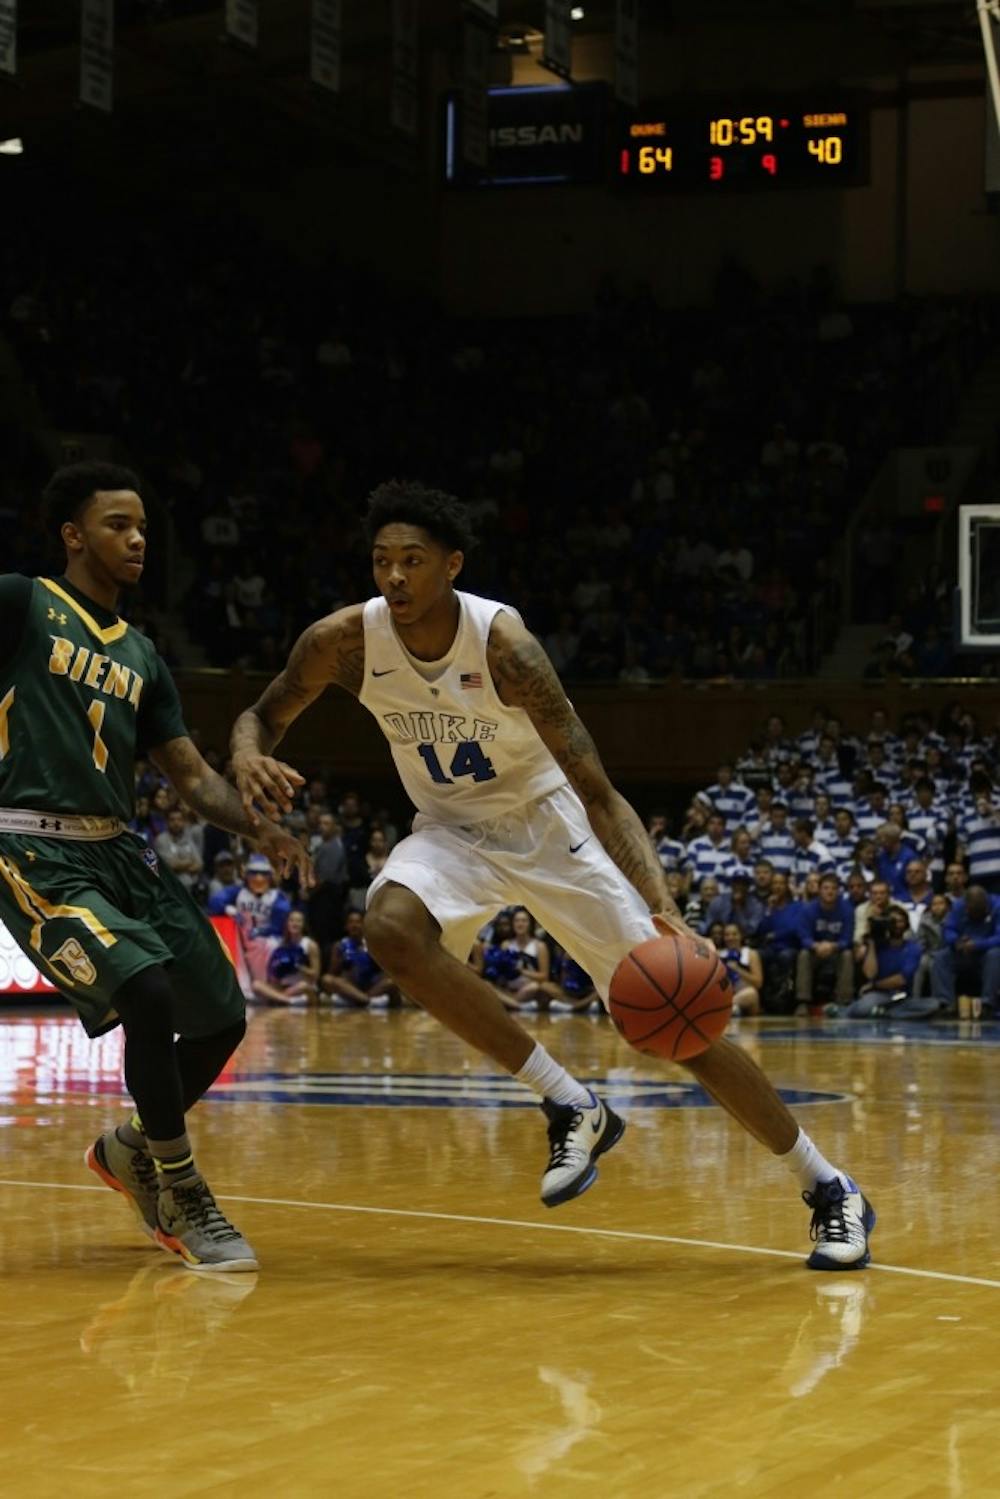 <p>Freshman Brandon Ingram saw a 3-pointer go down late in the second half after struggling from downtown all night. The Kinston, N.C., native finished with 15 points on 5-of-16 shooting.</p>